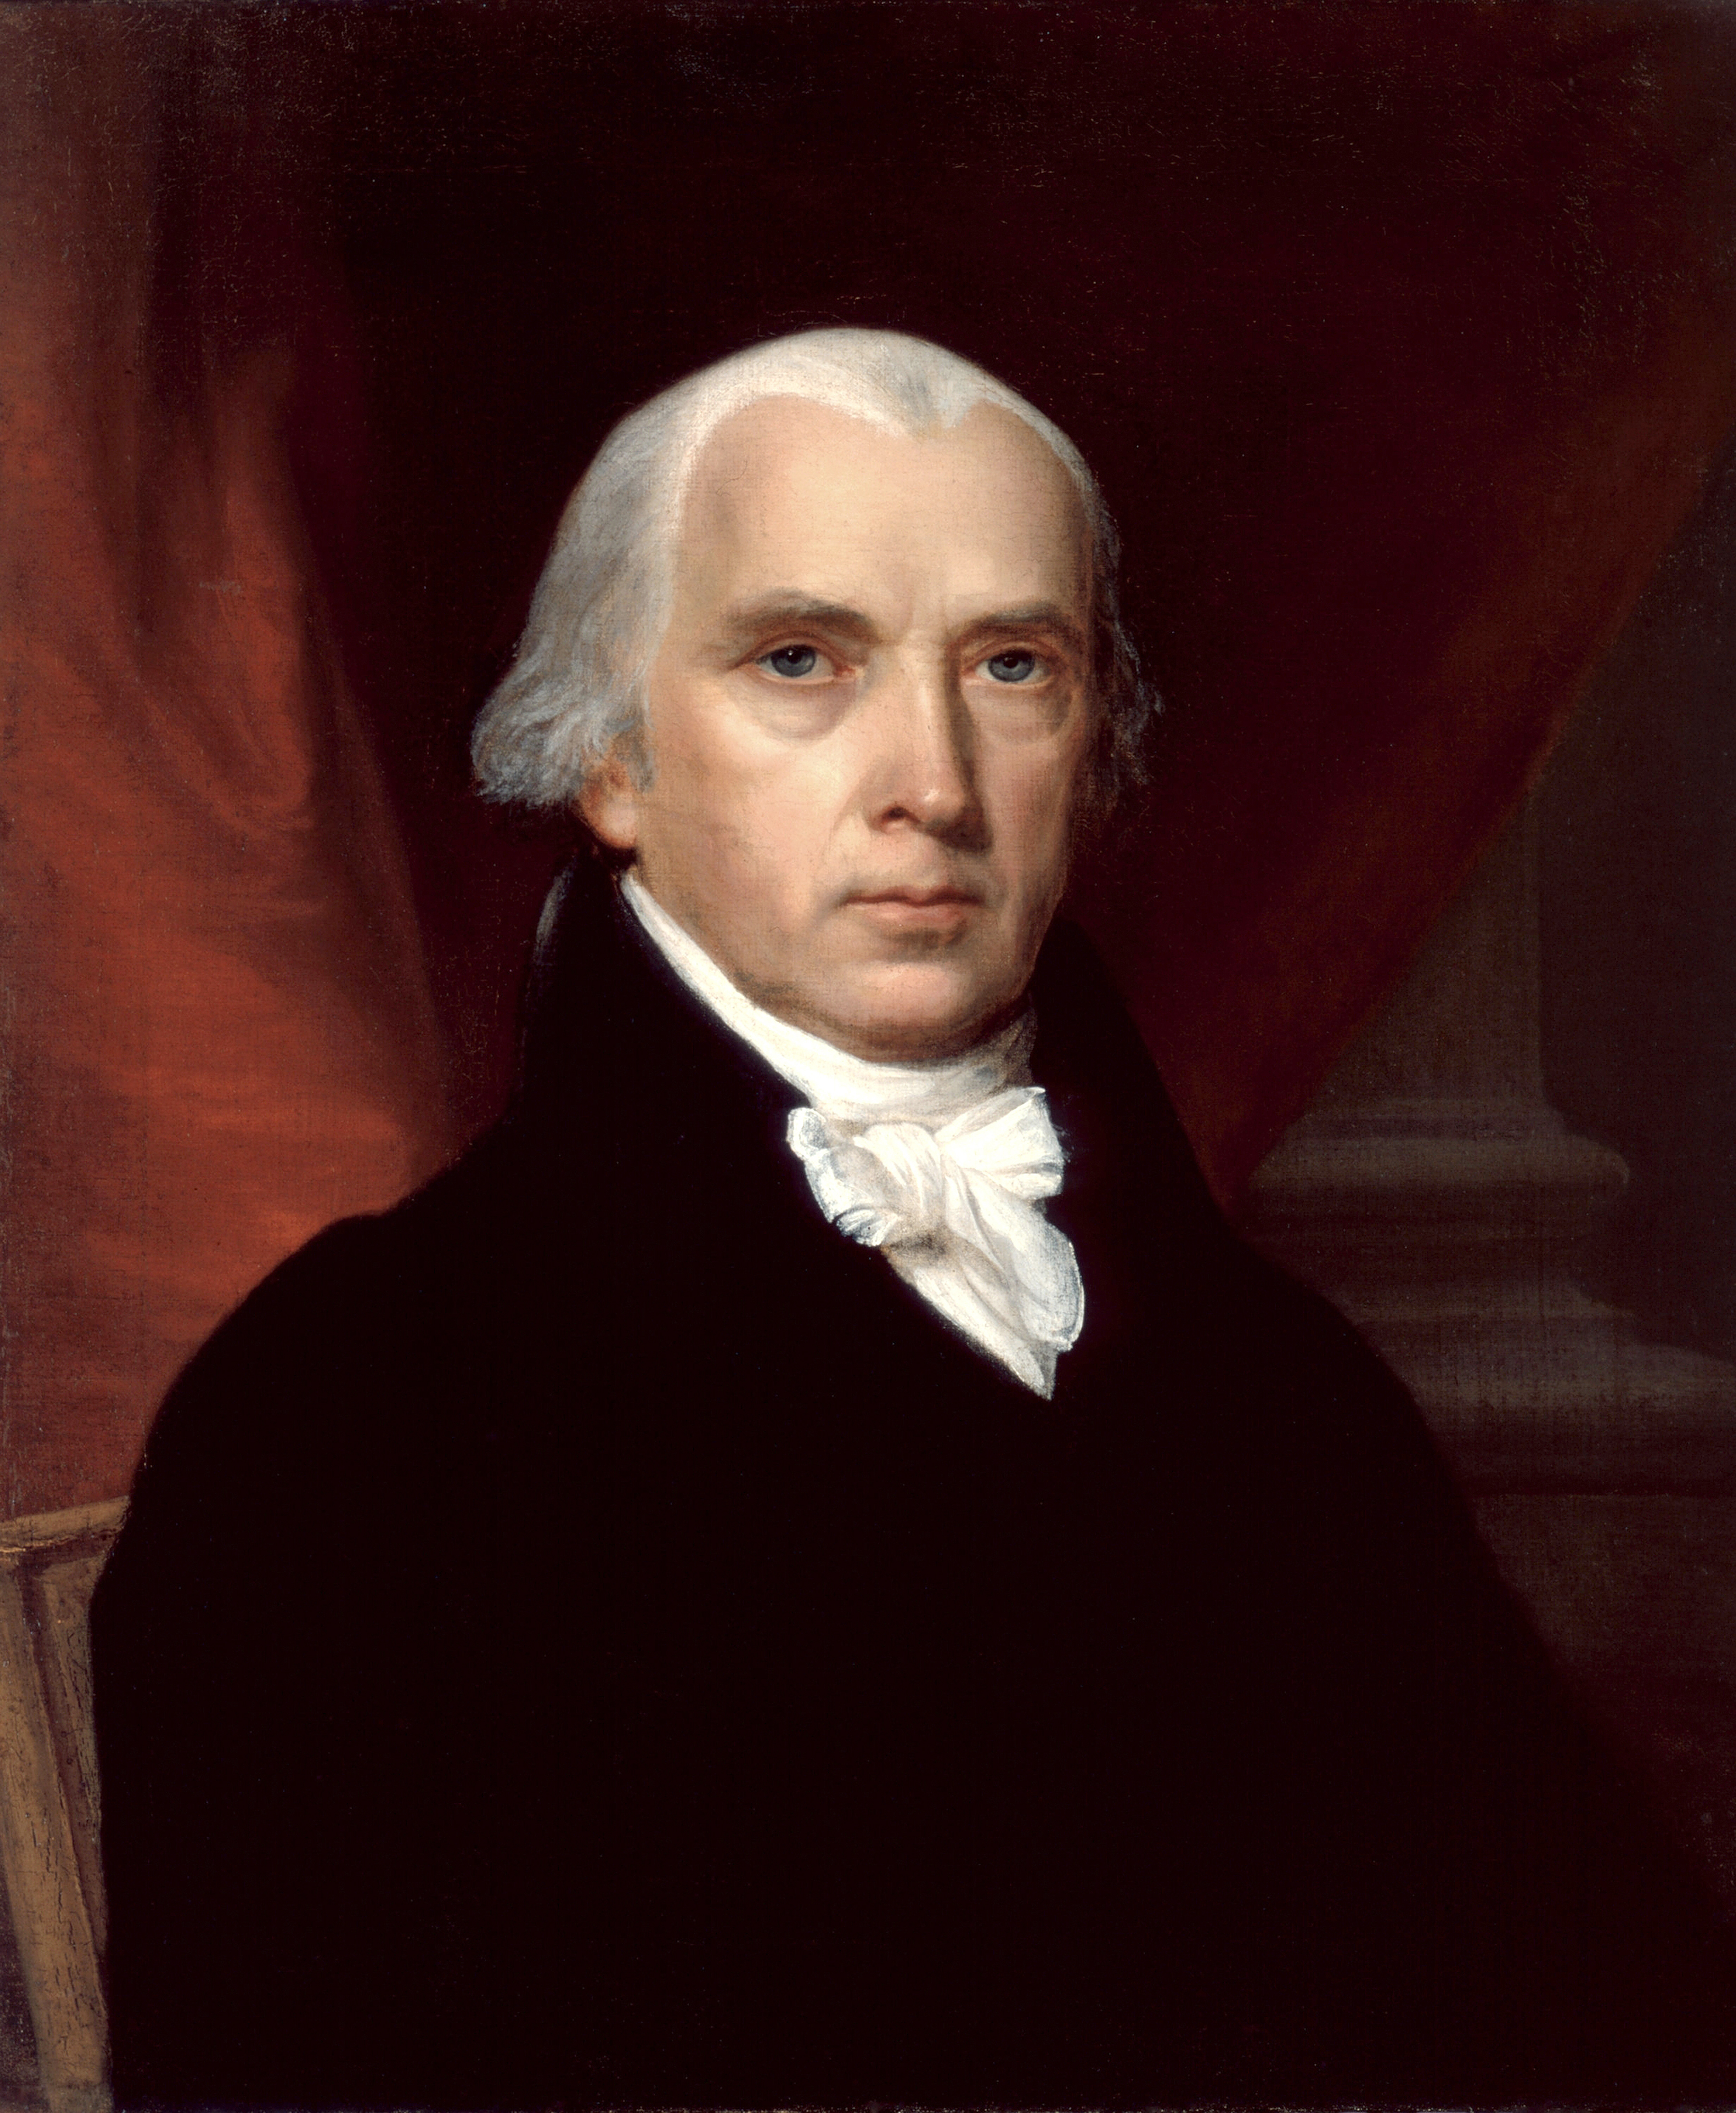 Portrait of James Madison. (Getty Images)